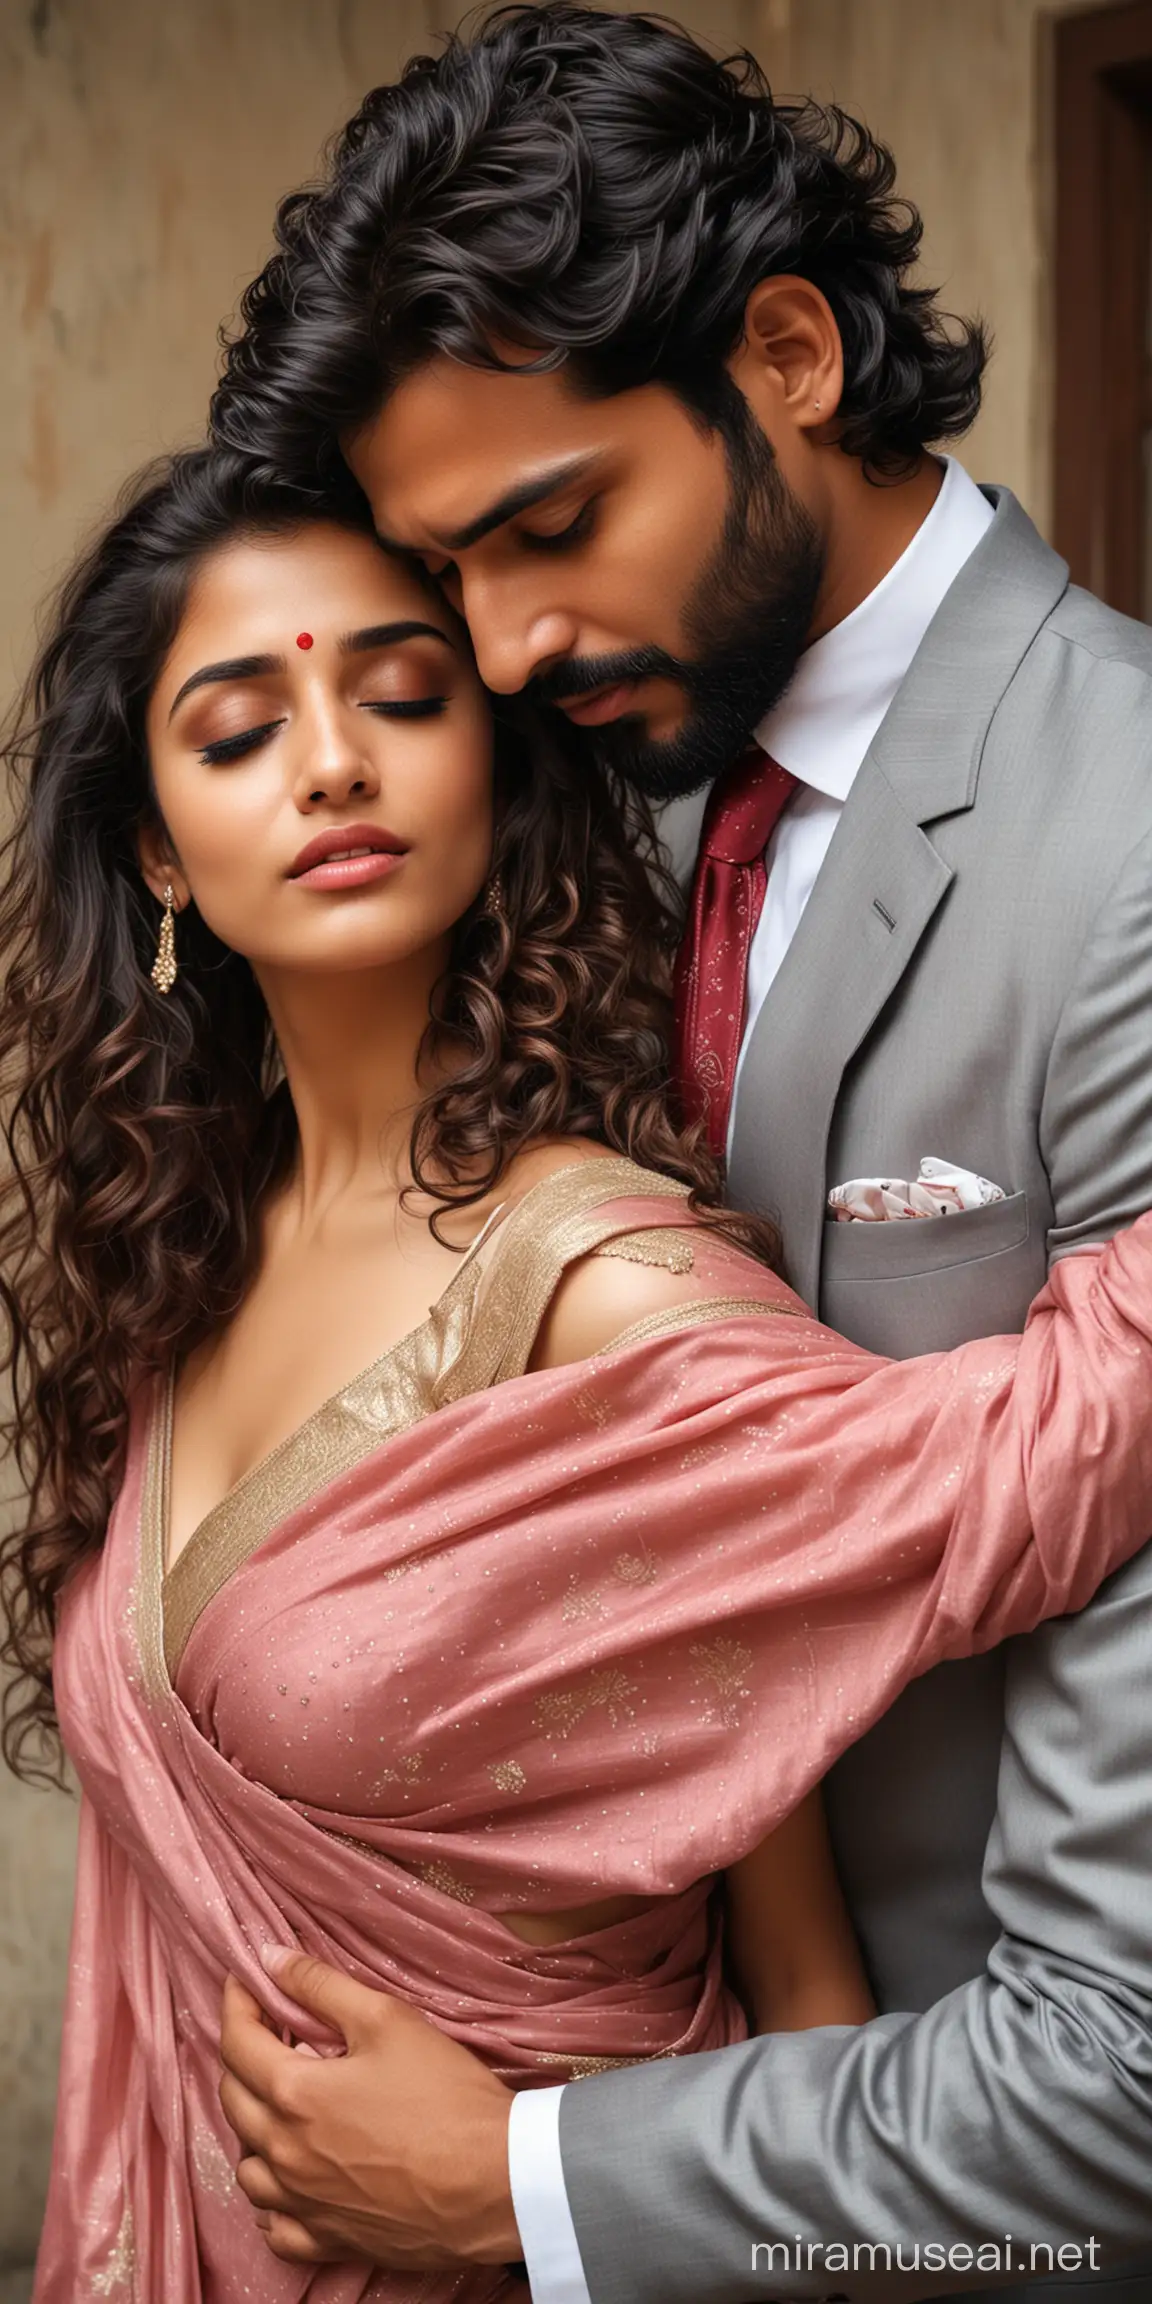 Comforting Emotional Indian Couple in Elegant Formal Attire